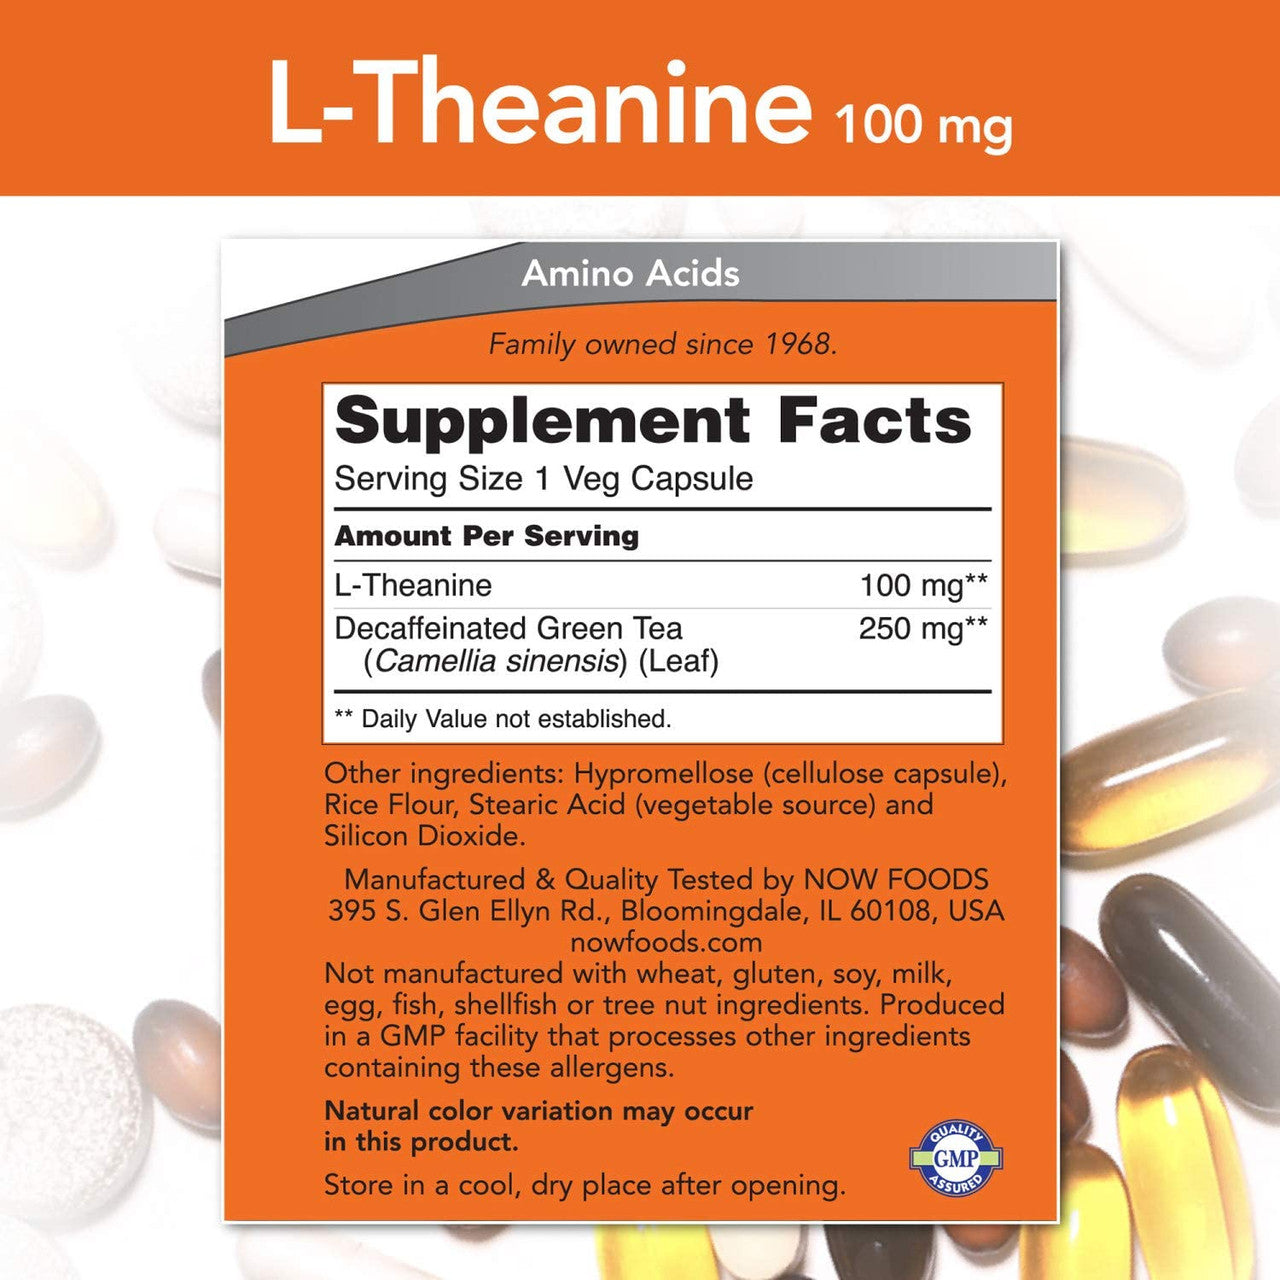 Now L-Theanine 100mg supplement facts